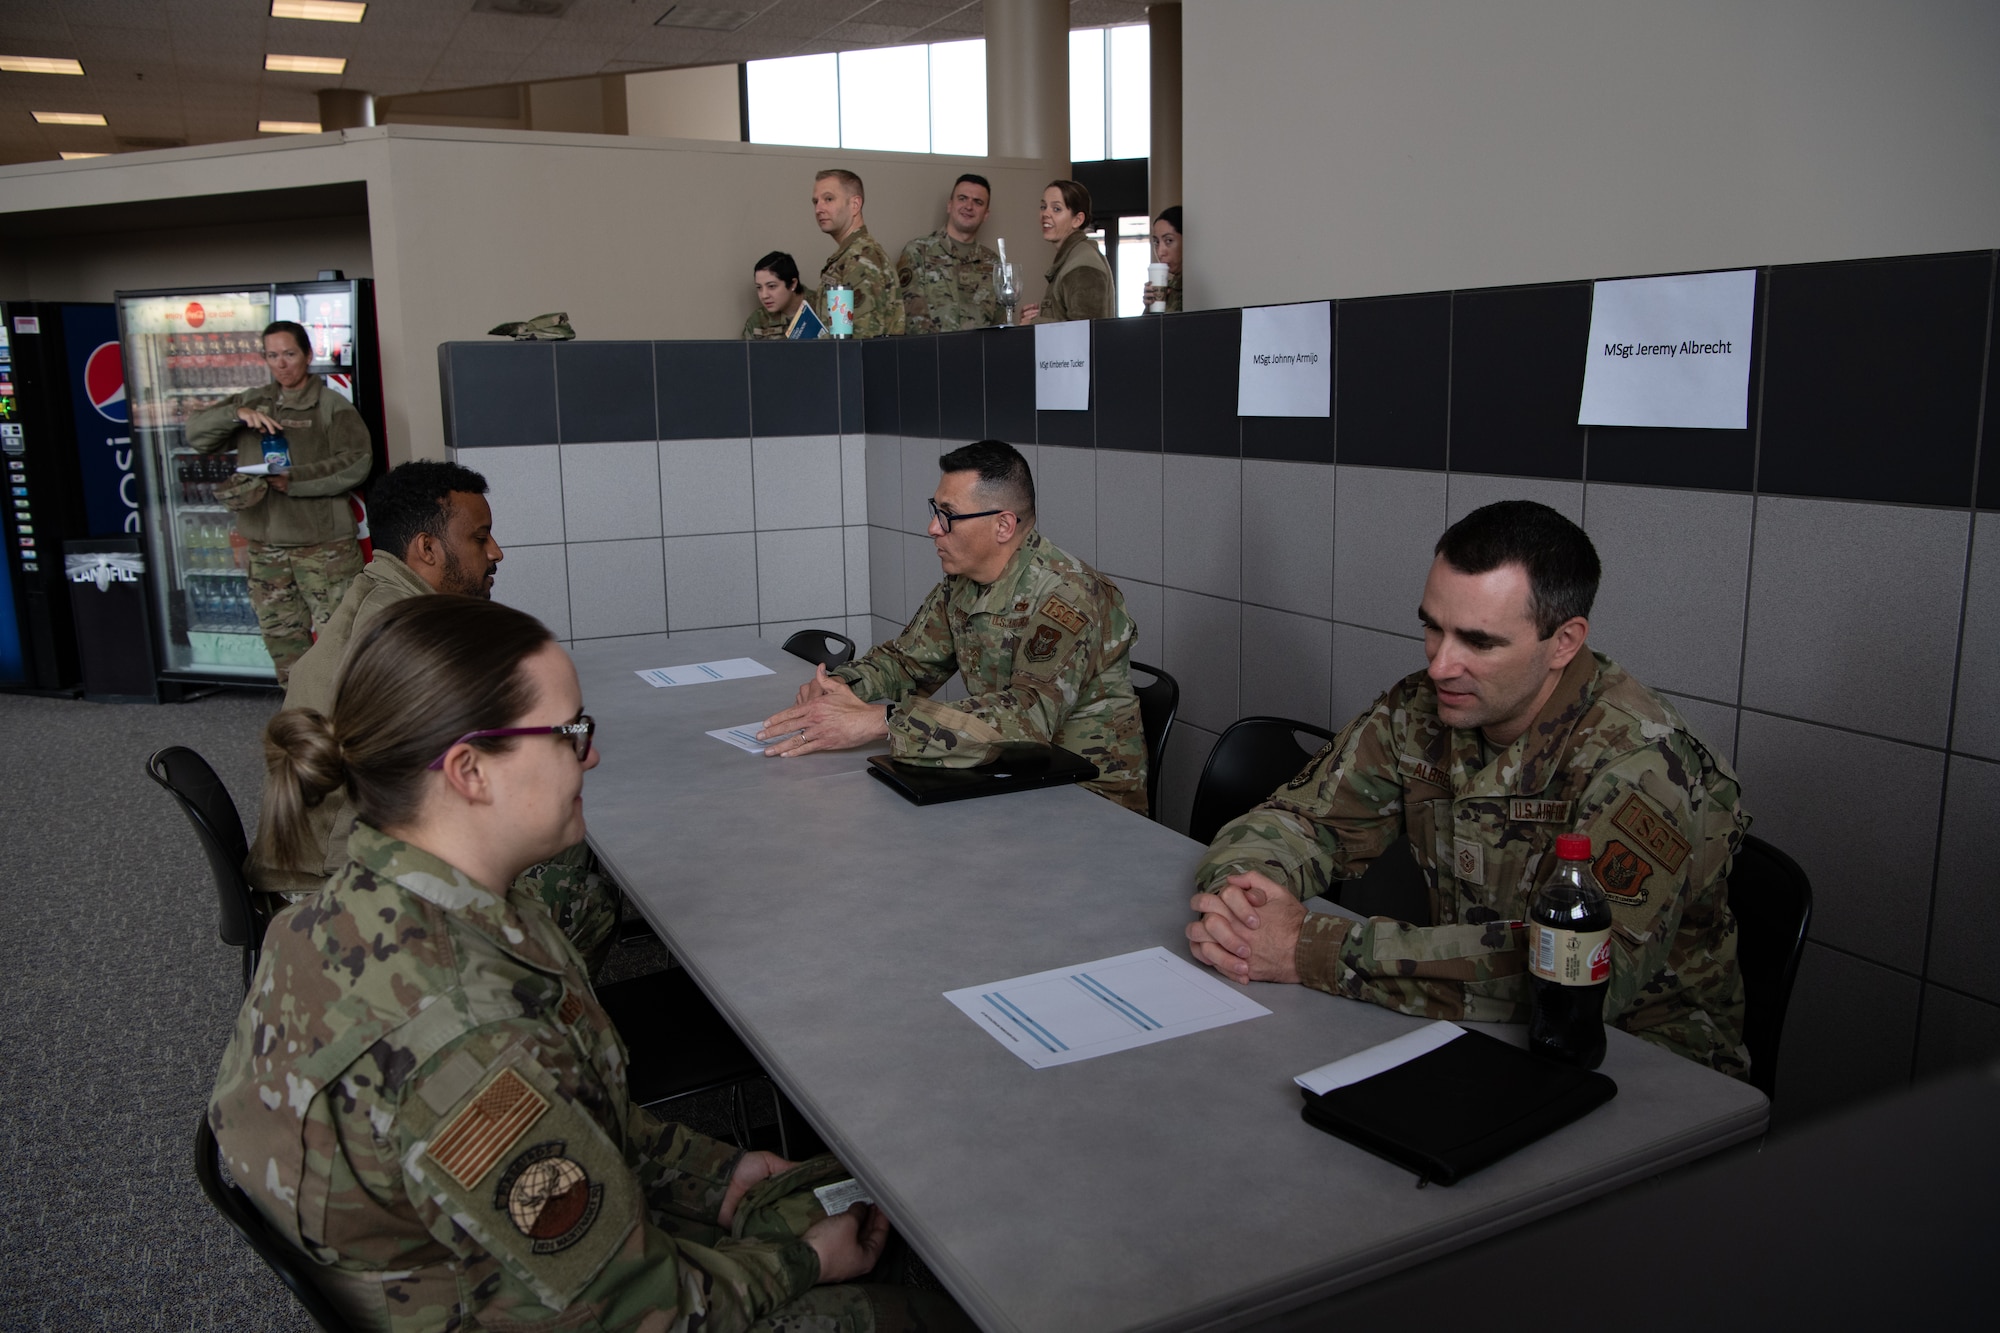 People in military uniform sit at a table having a conversation.